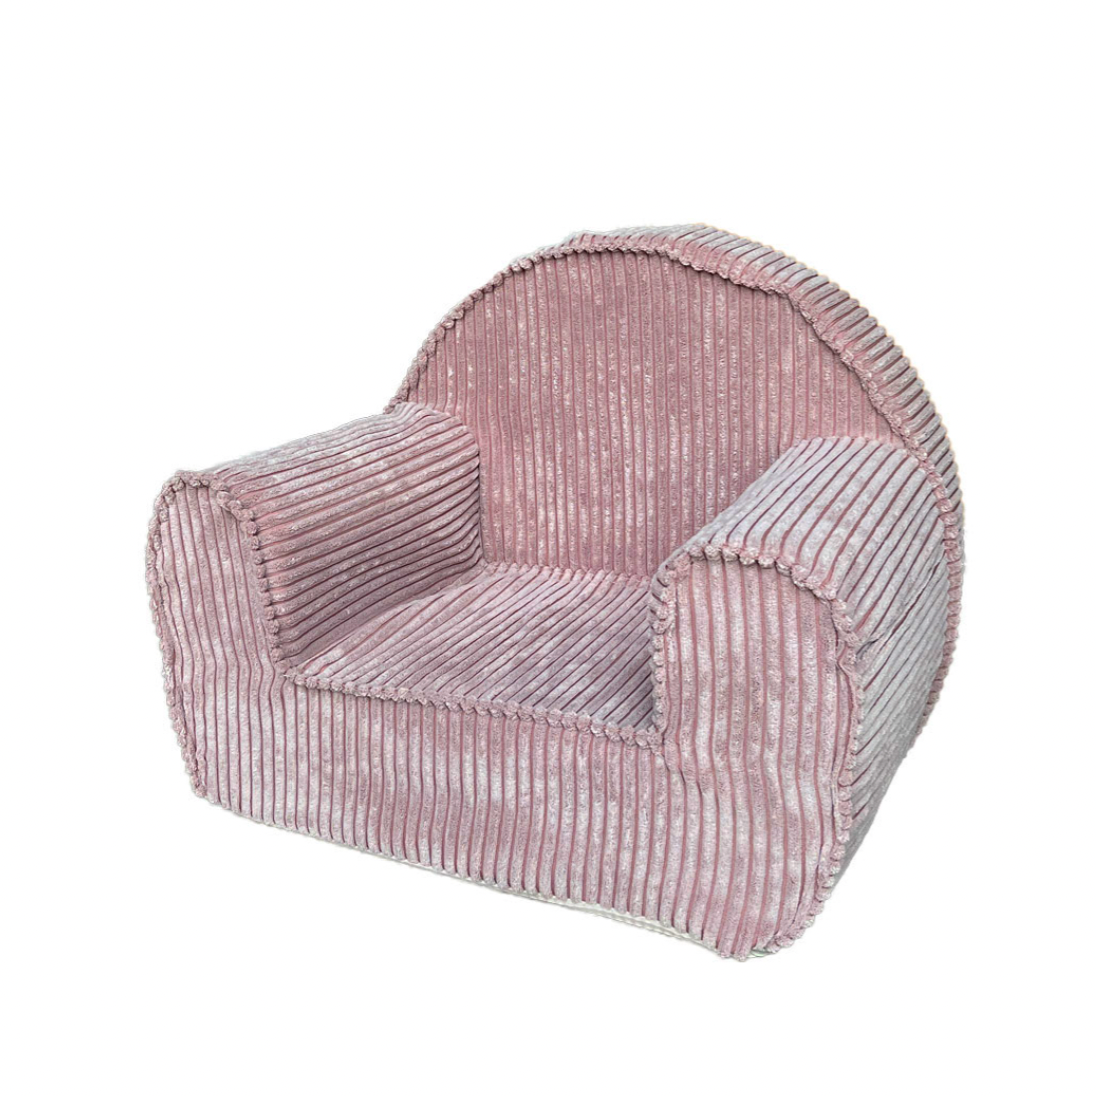 Chunky Corduroy Toddler Armchair, Dusty Pink